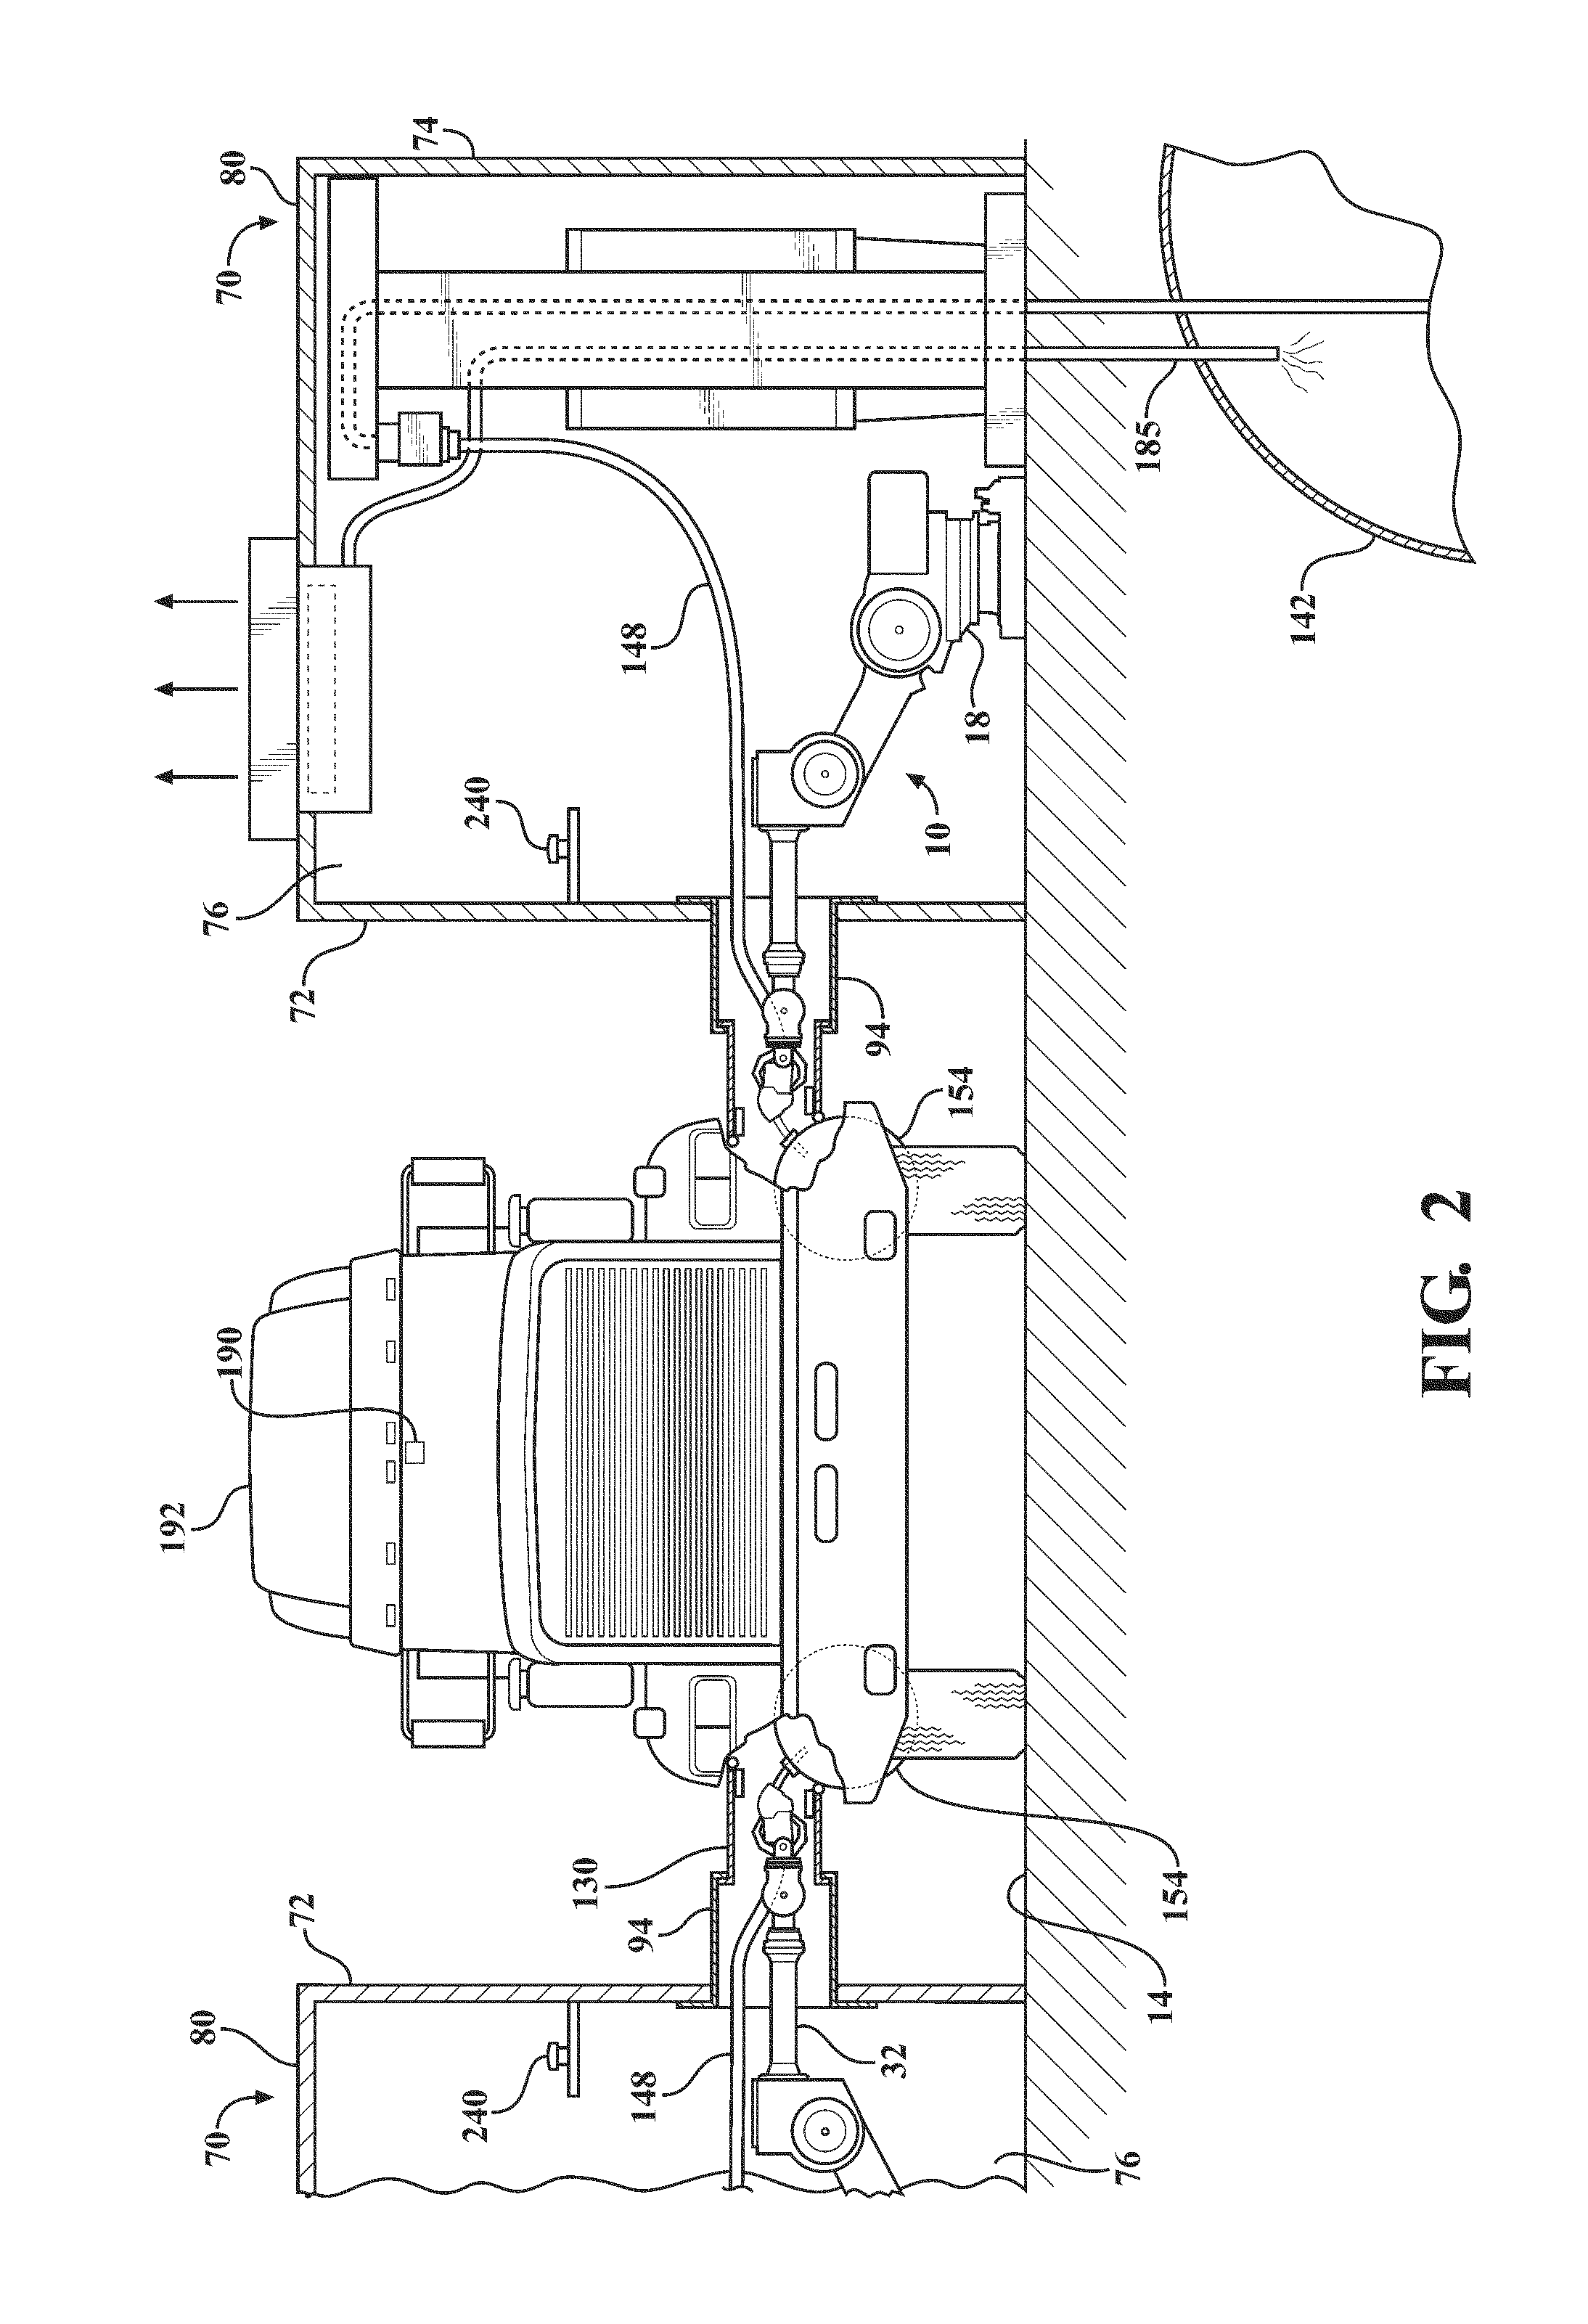 Automated vehicle fueling apparatus and method